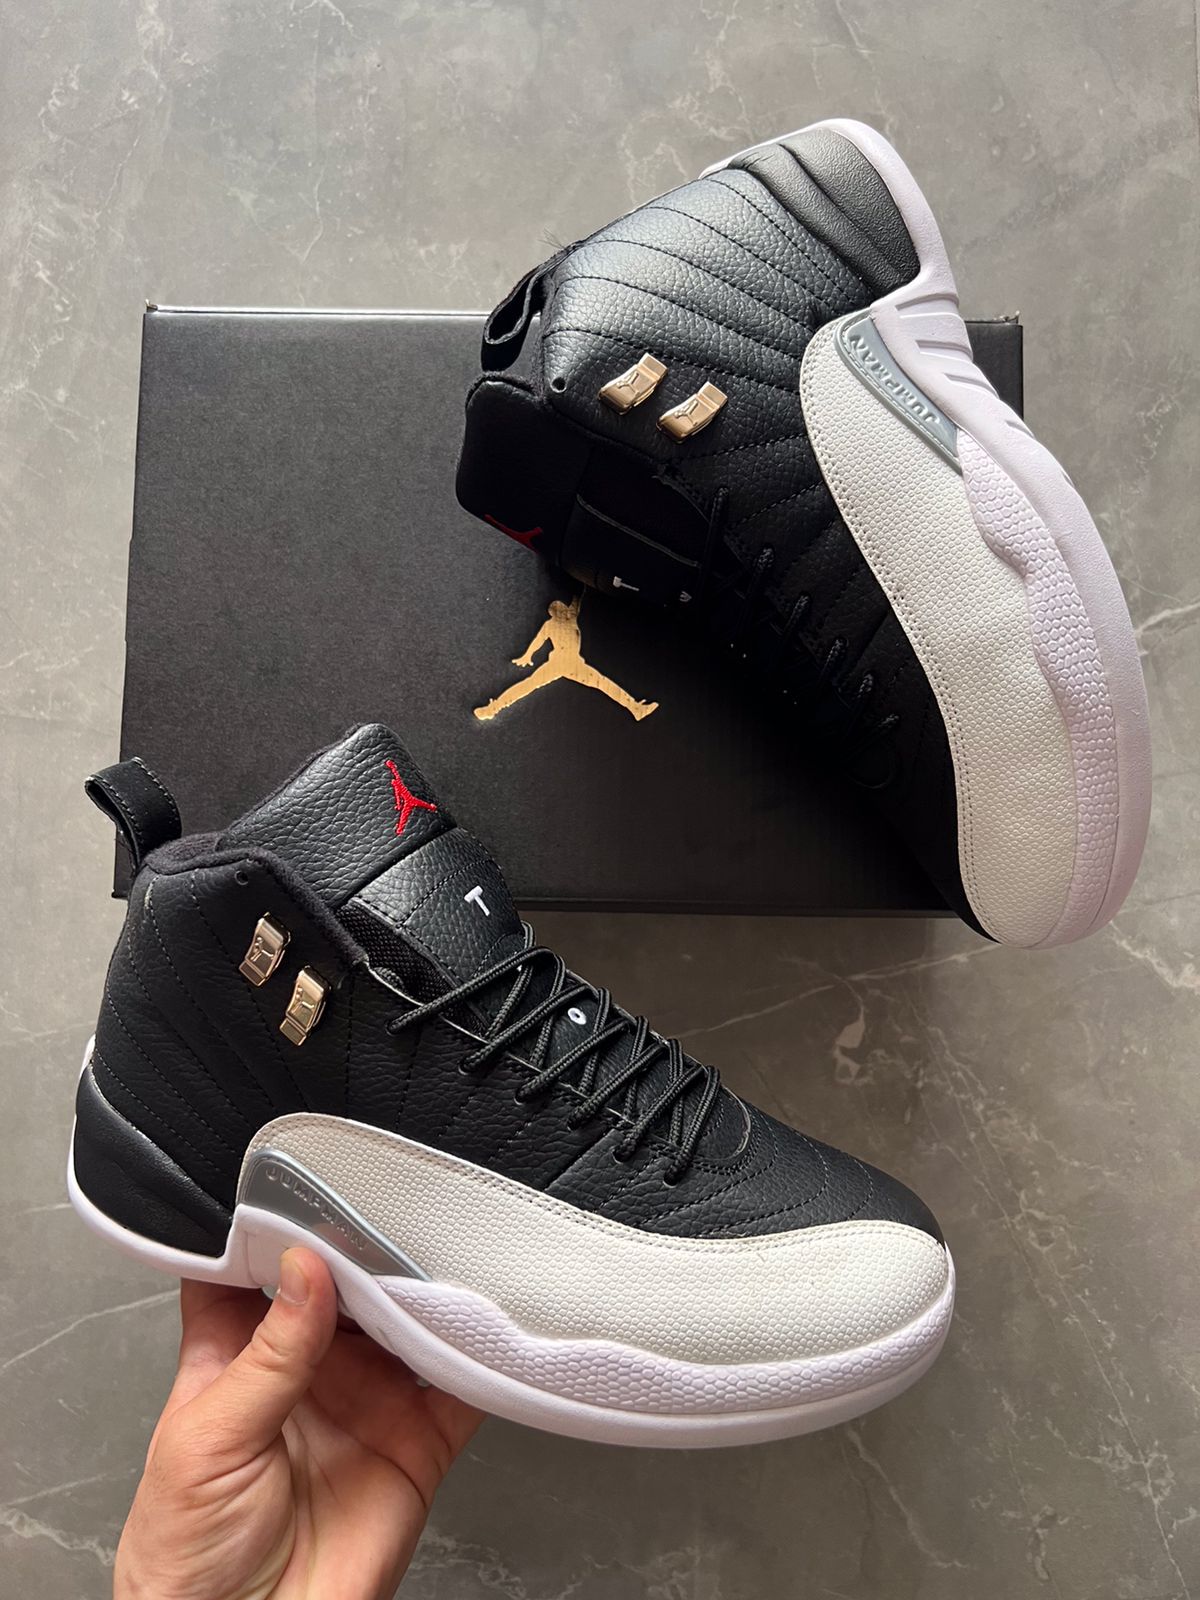 Retro 12 Sneakers First Copy